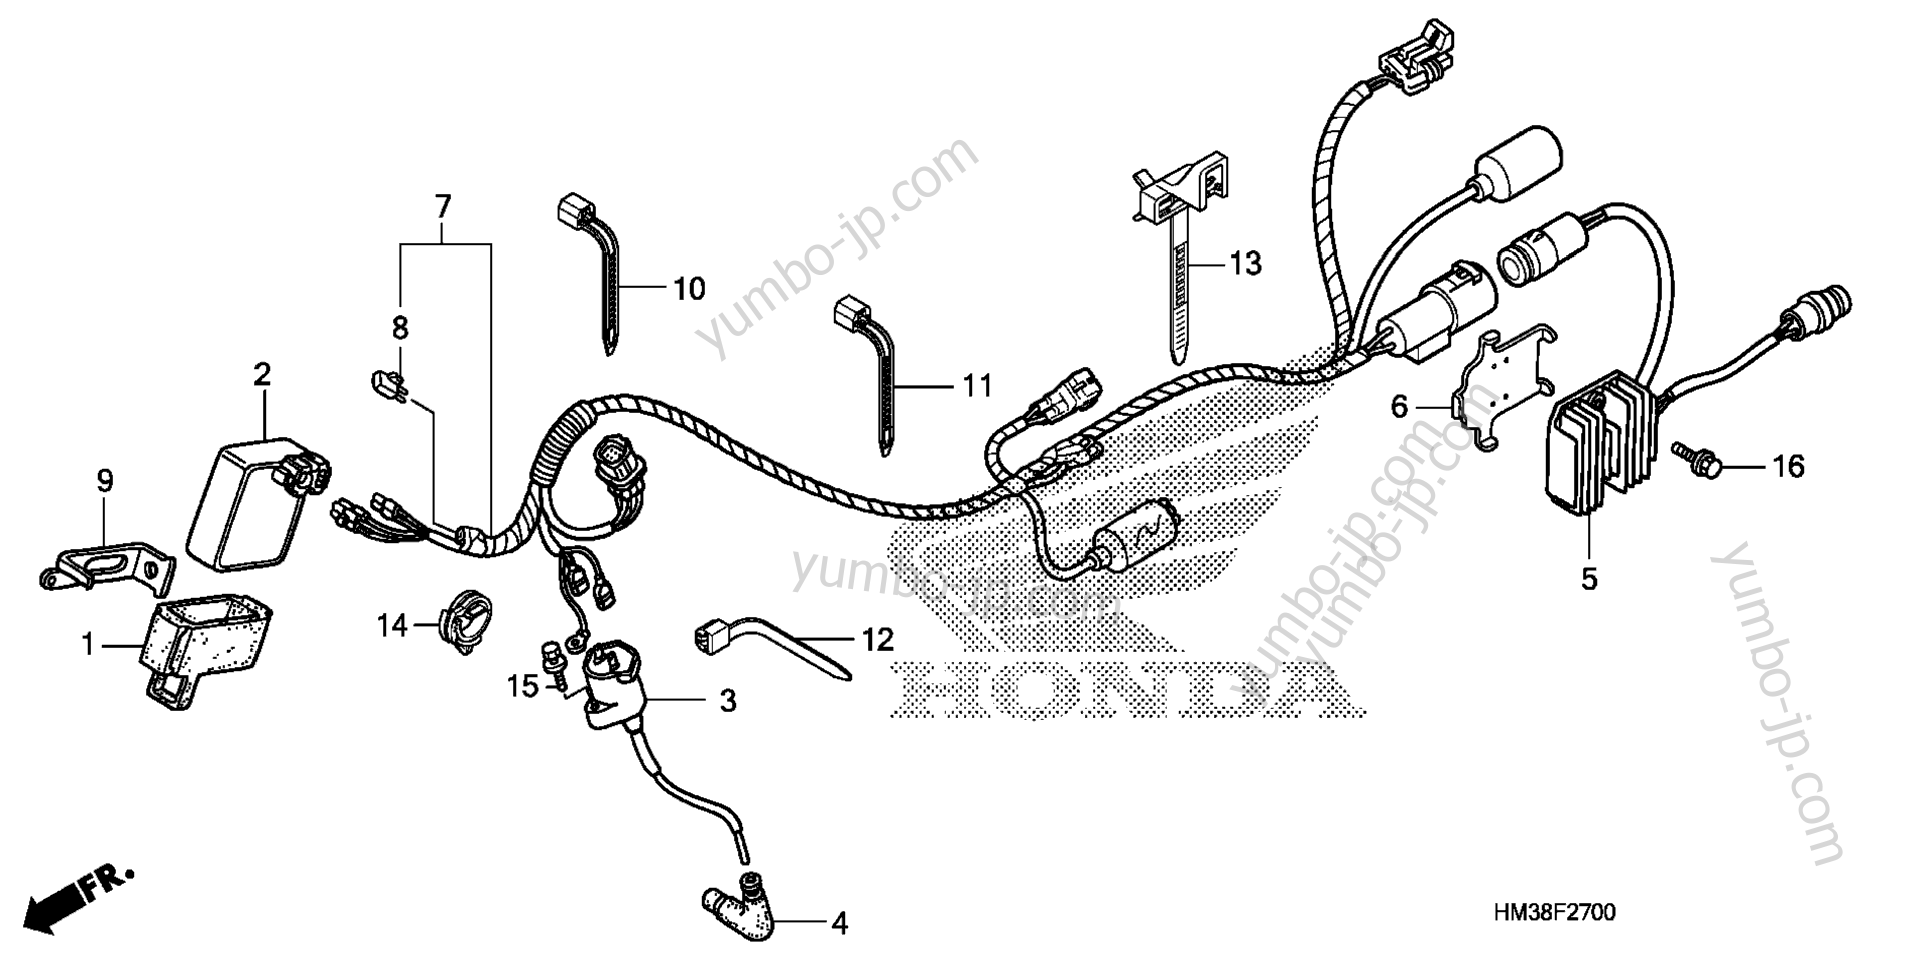 WIRE HARNESS for ATVs HONDA TRX300X A 2009 year